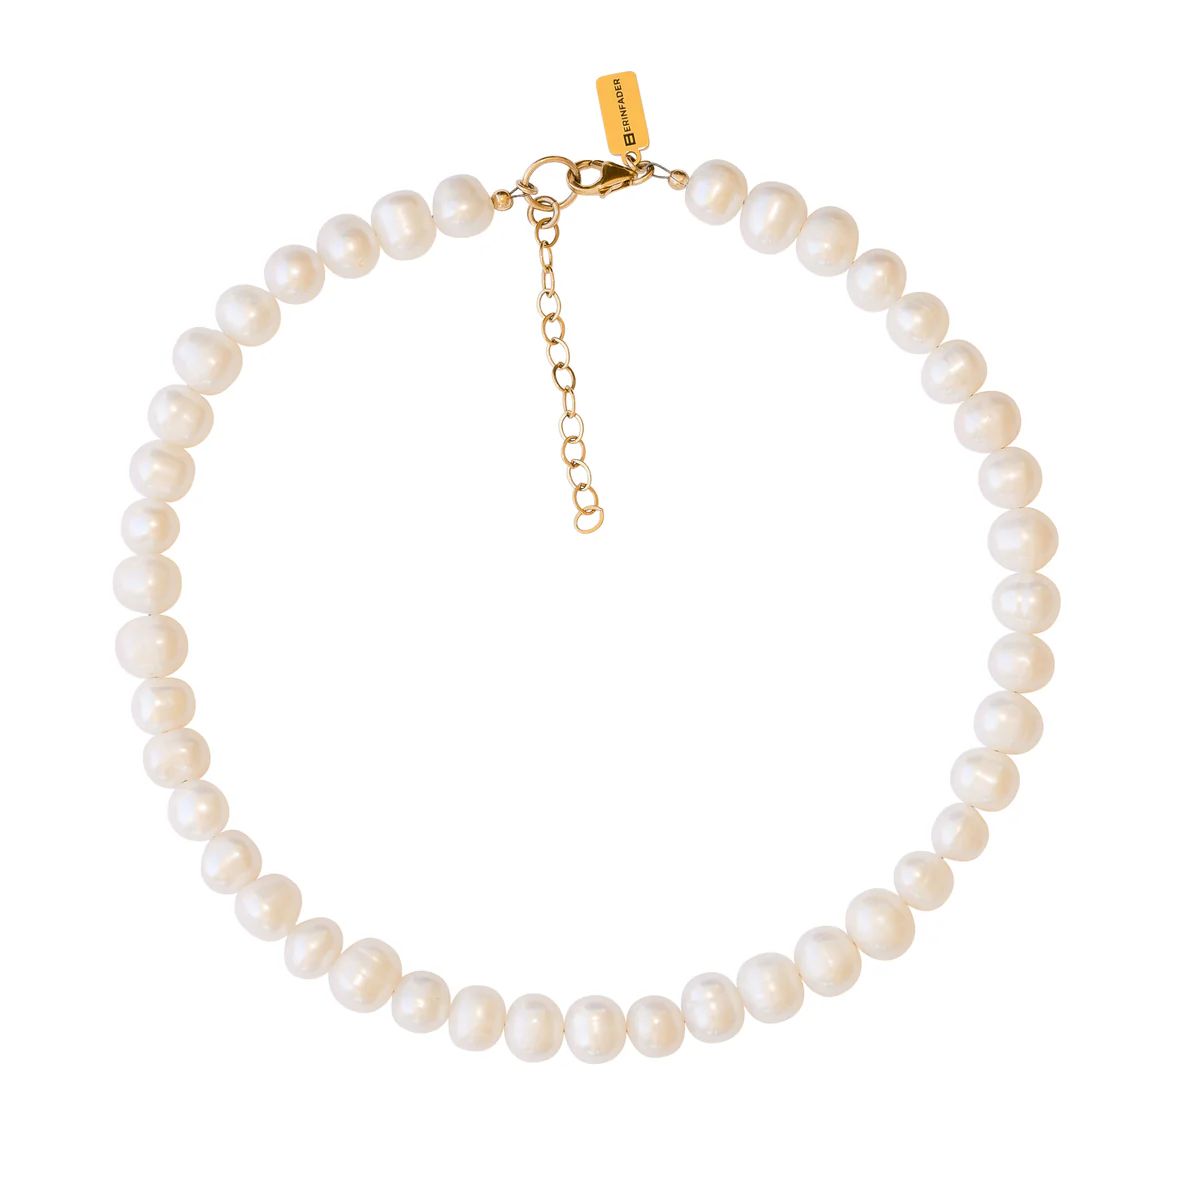 The Monroe Pearl Necklace | Erin Fader Jewelry Design